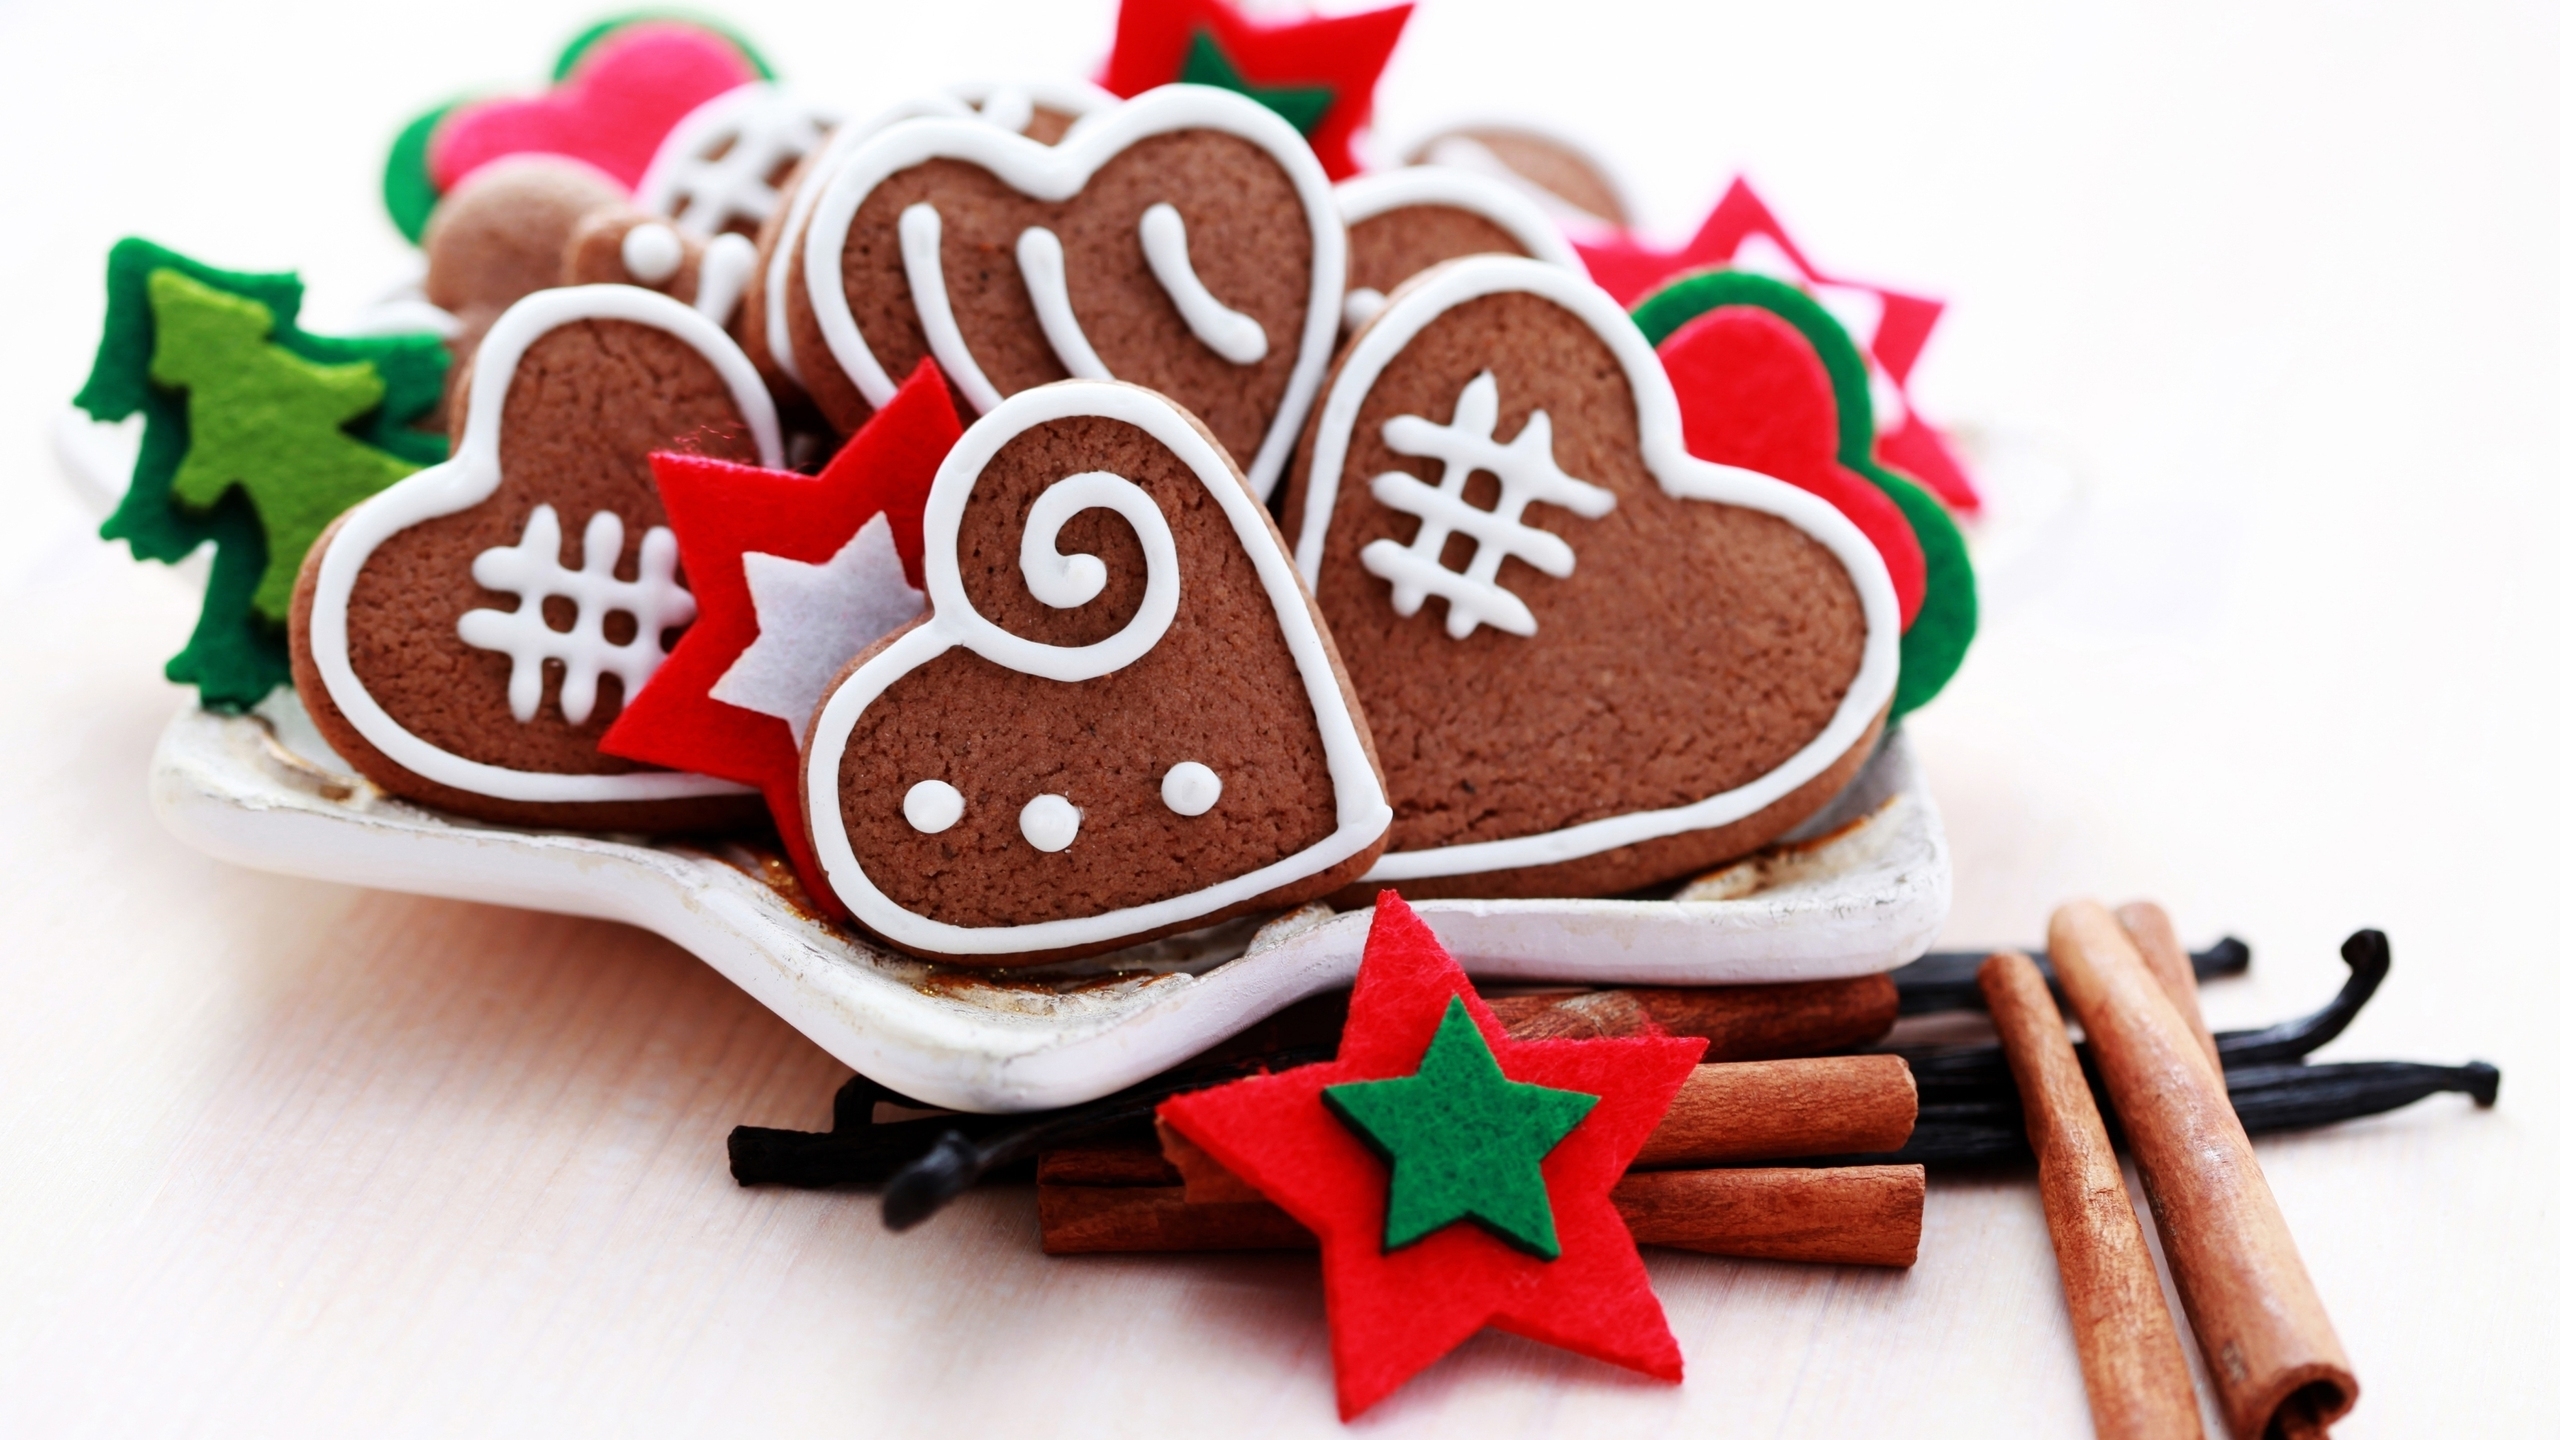 Christmas Sweets Ideas for 2560x1440 HDTV resolution